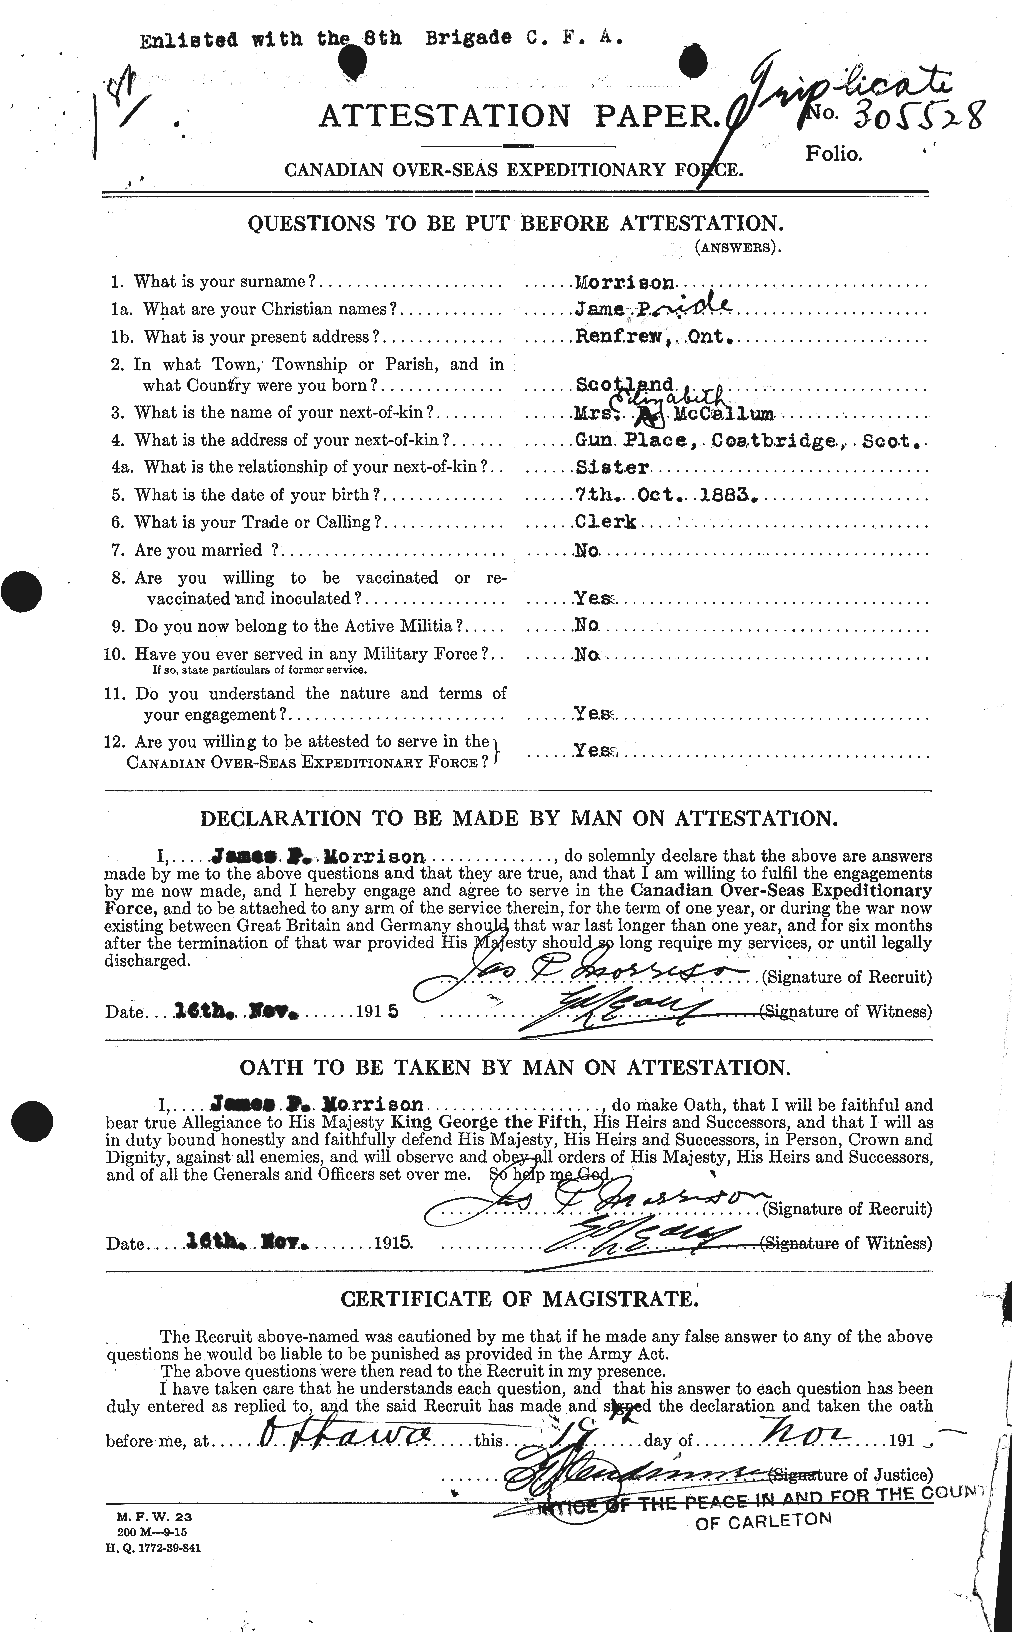 Personnel Records of the First World War - CEF 506946a